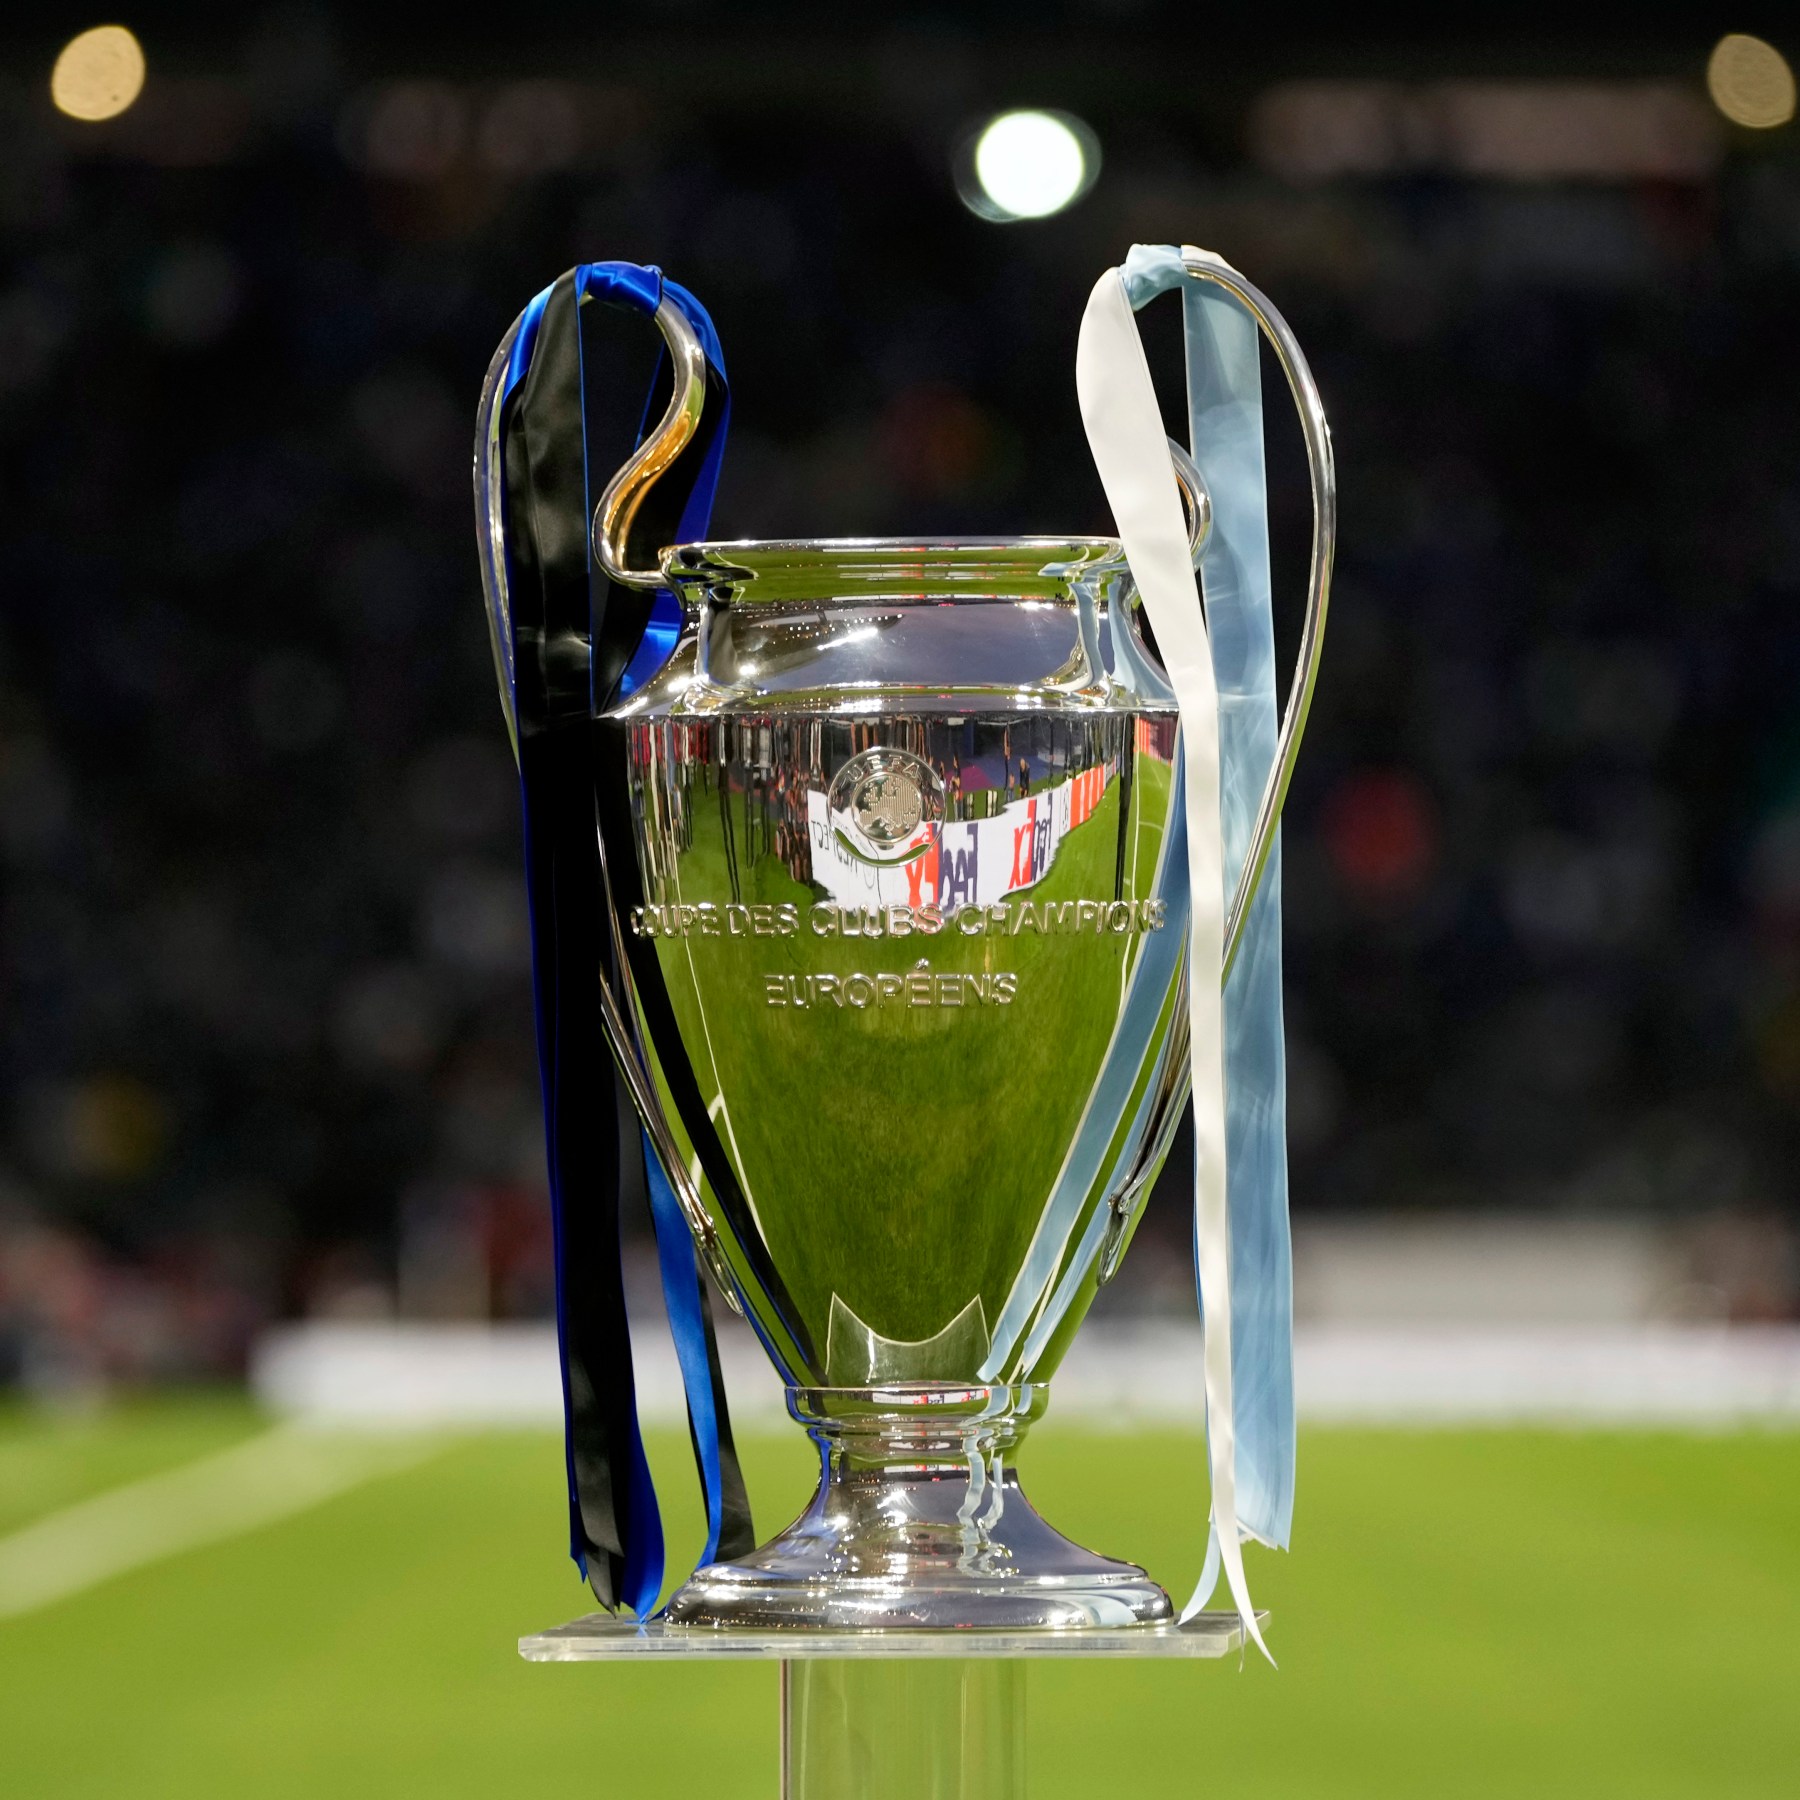 UEFA Champions League returns: Five football matches to follow